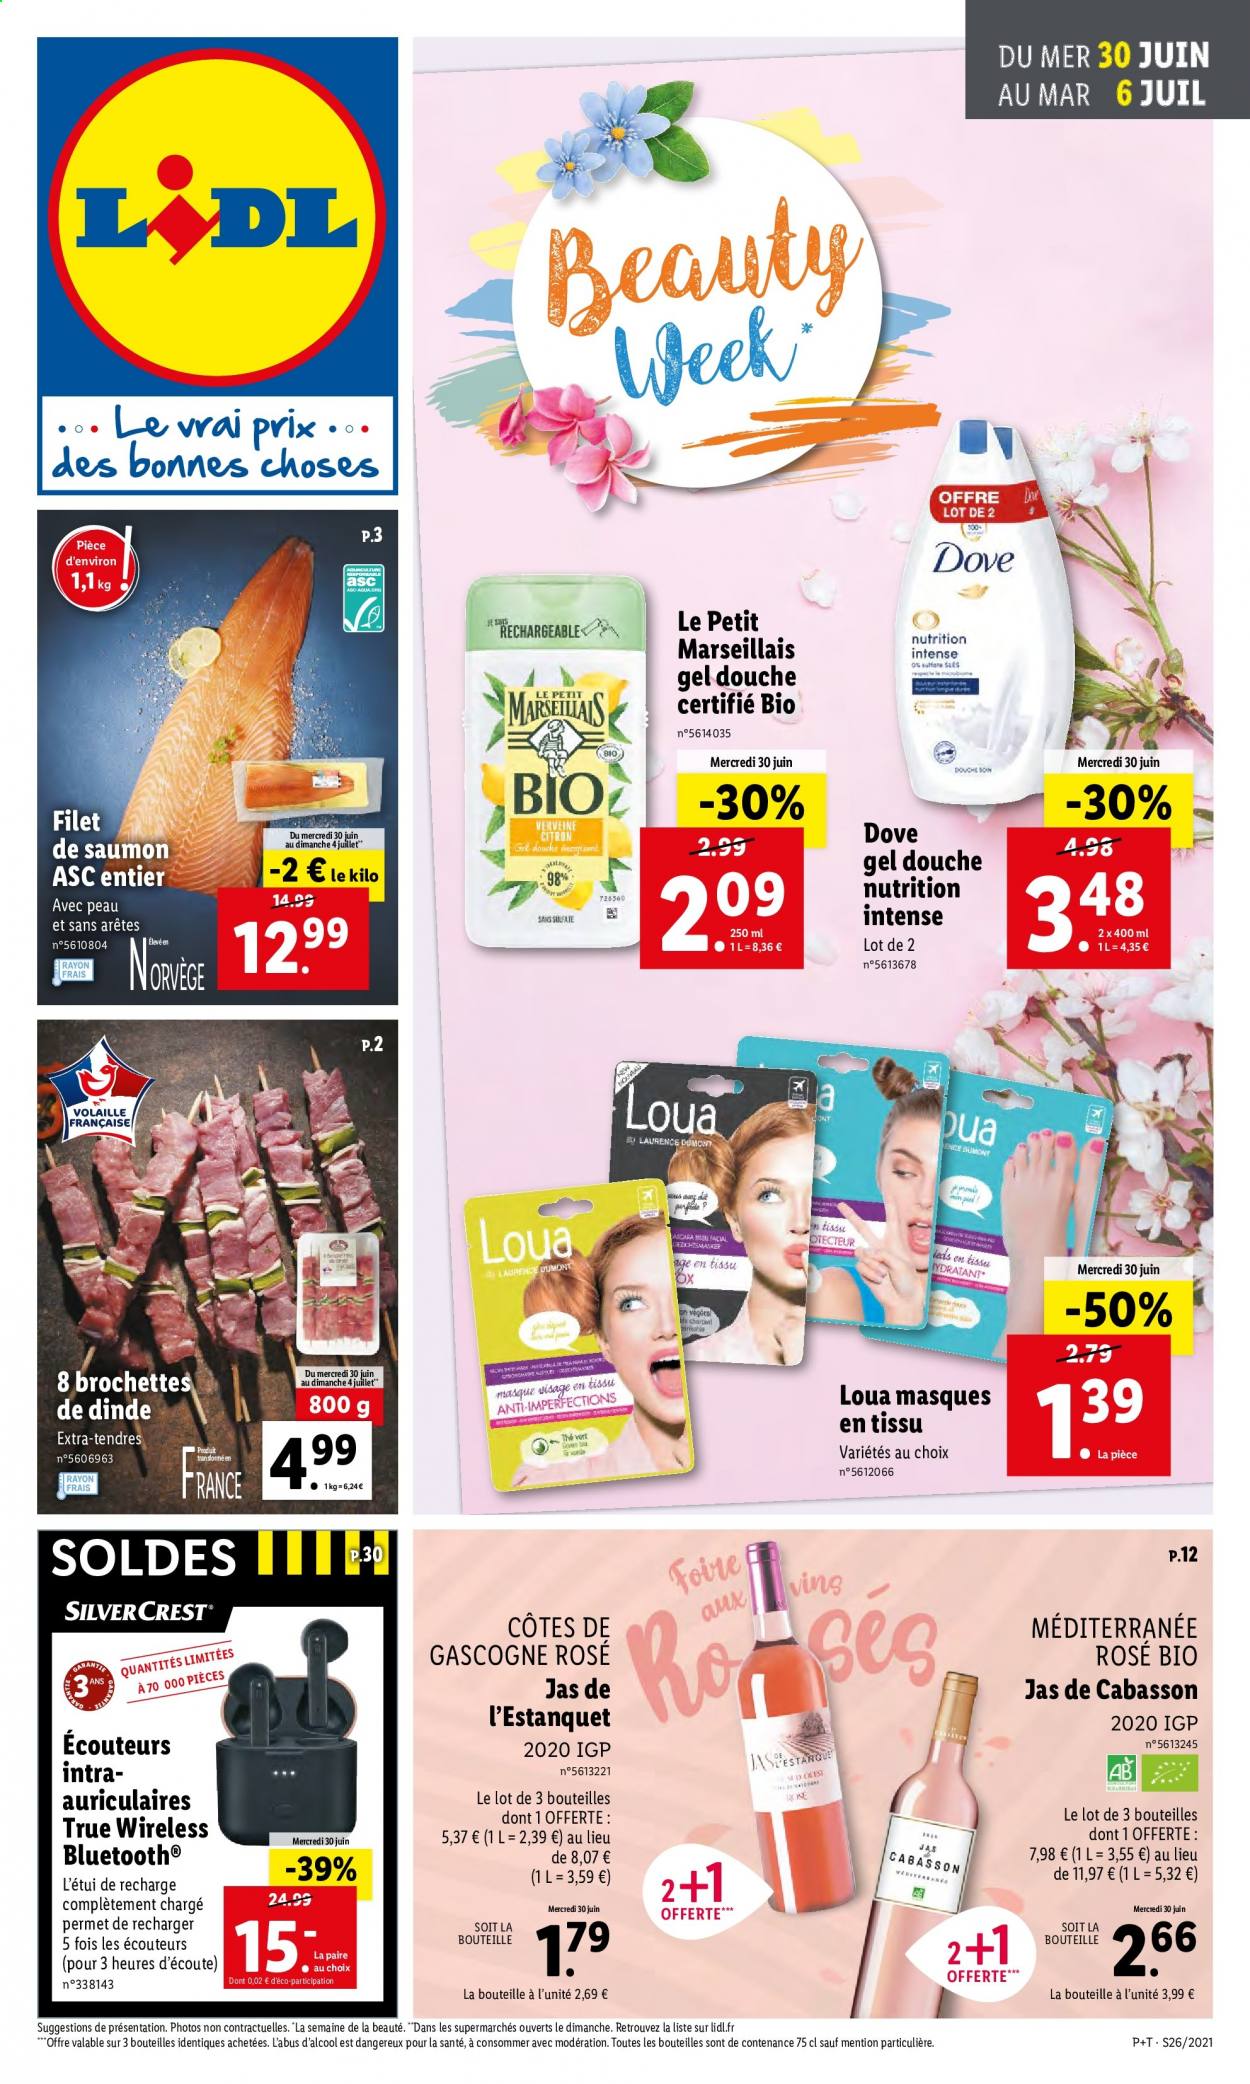 Catalogue Lidl - 30.06.2021 - 06.07.2021. Page 1.